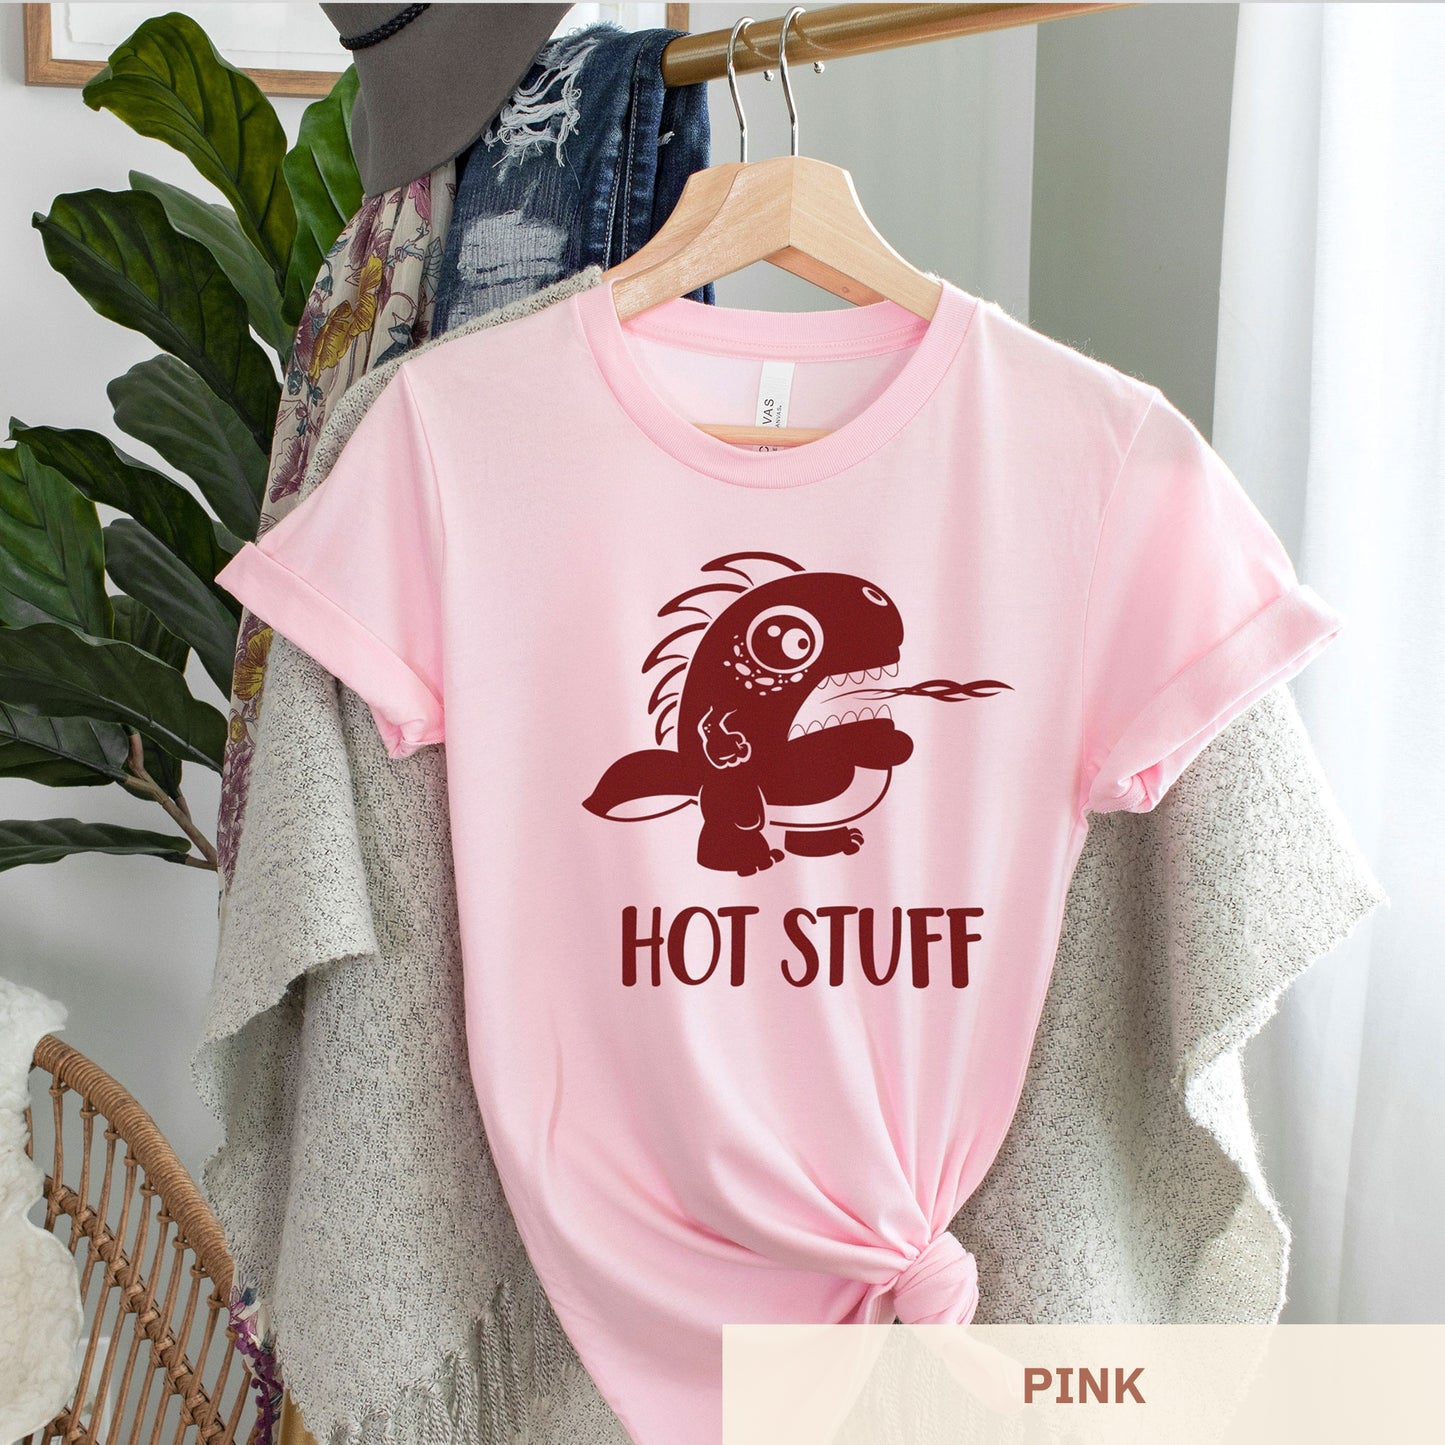 A hanging pink Bella Canvas t-shirt wearing a cute cartoon monster that is belching fire with the words hot stuff.